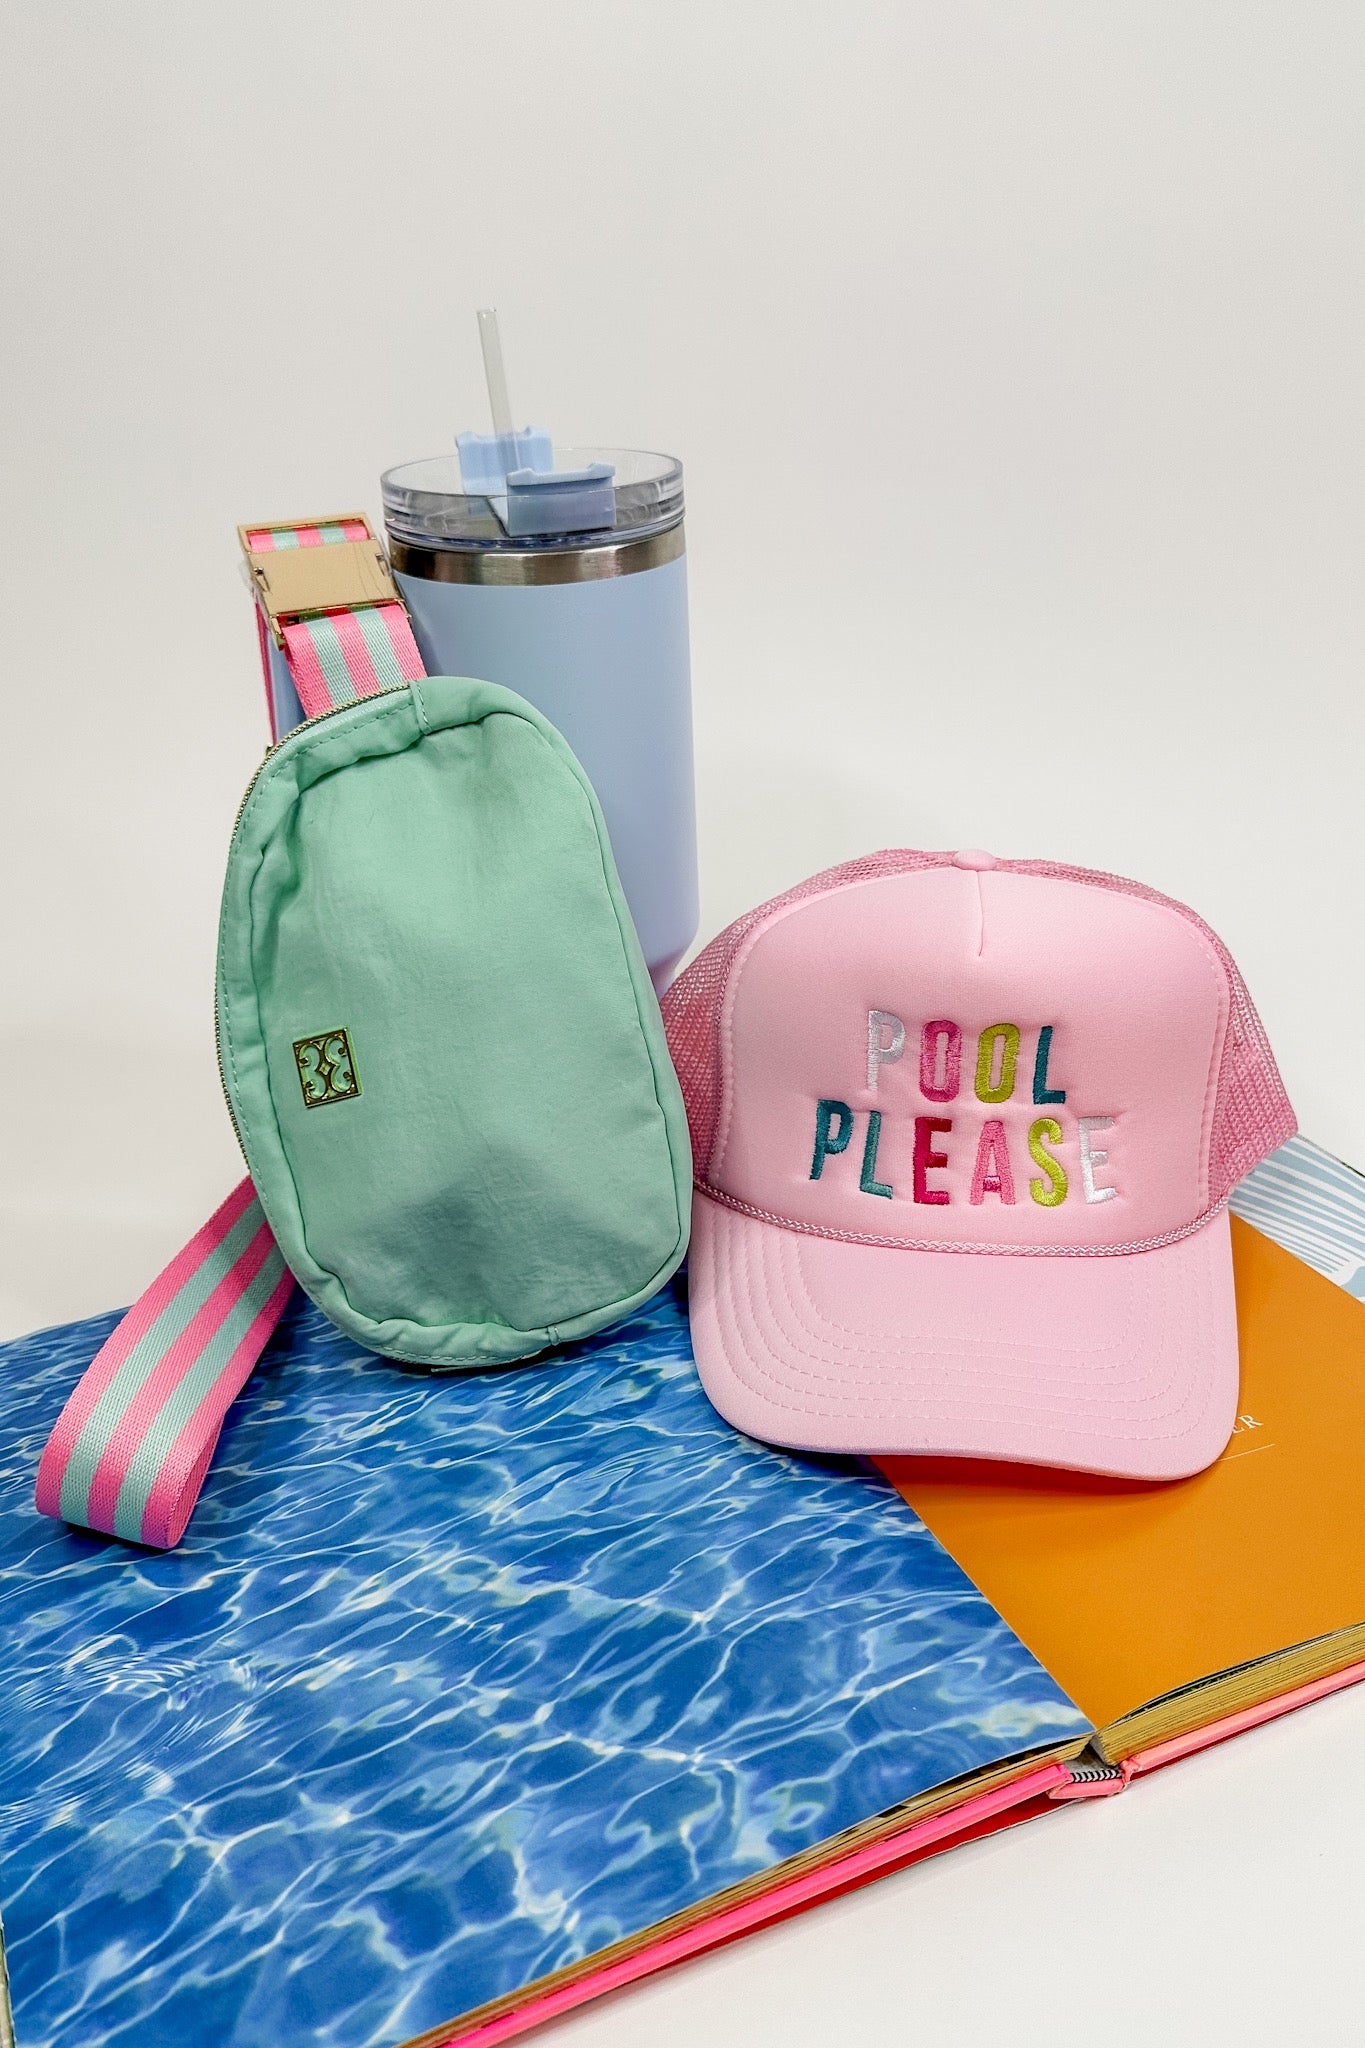 Pool Please Embroidered Pink Trucker Hat